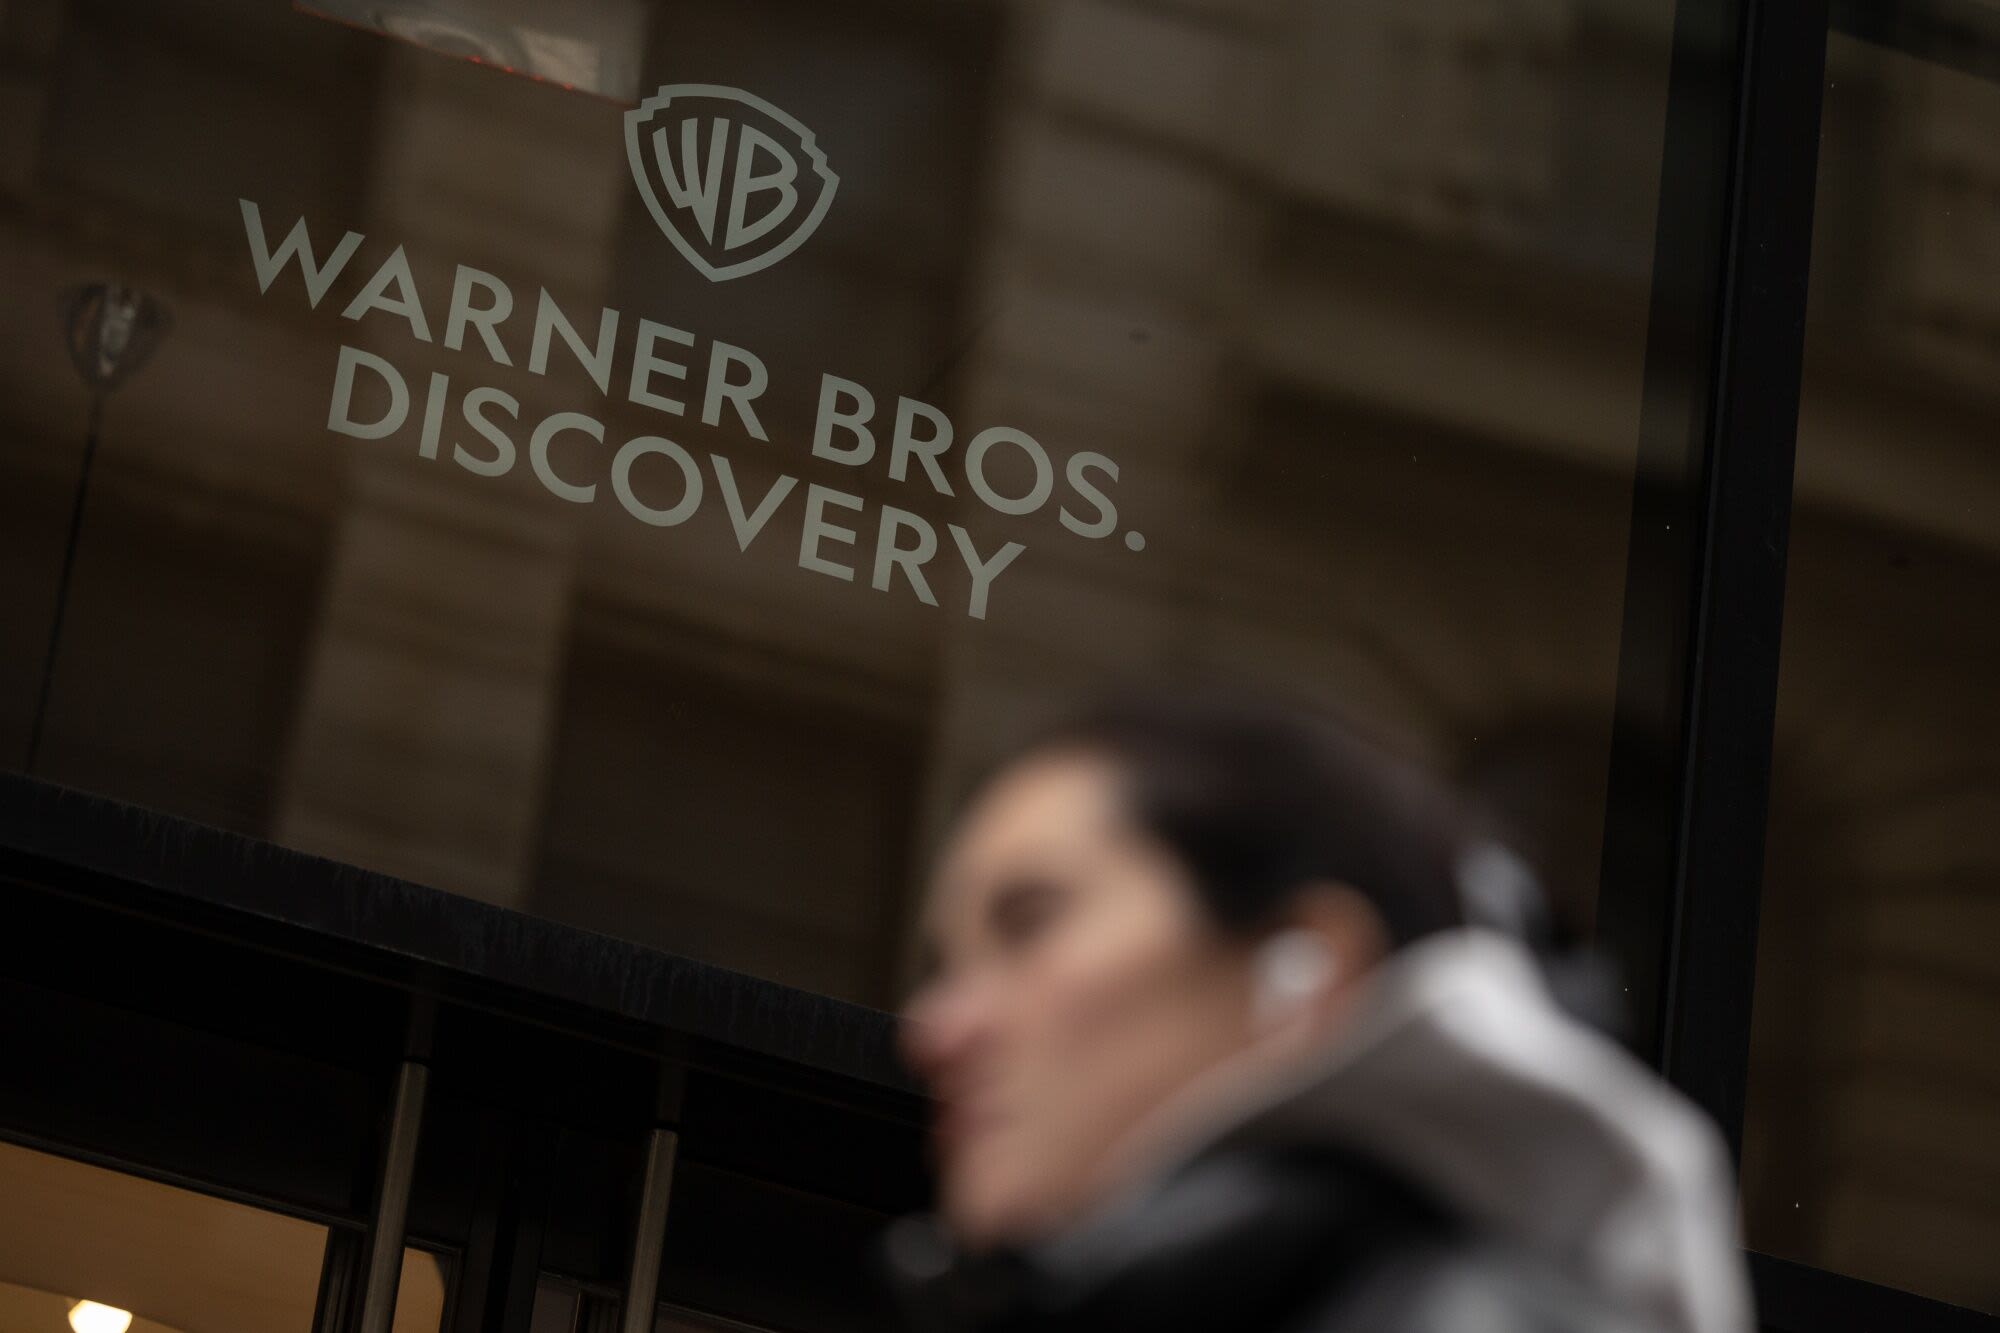 Warner Bros. Discovery Plans Fresh Cost Cuts, Max Price Hike